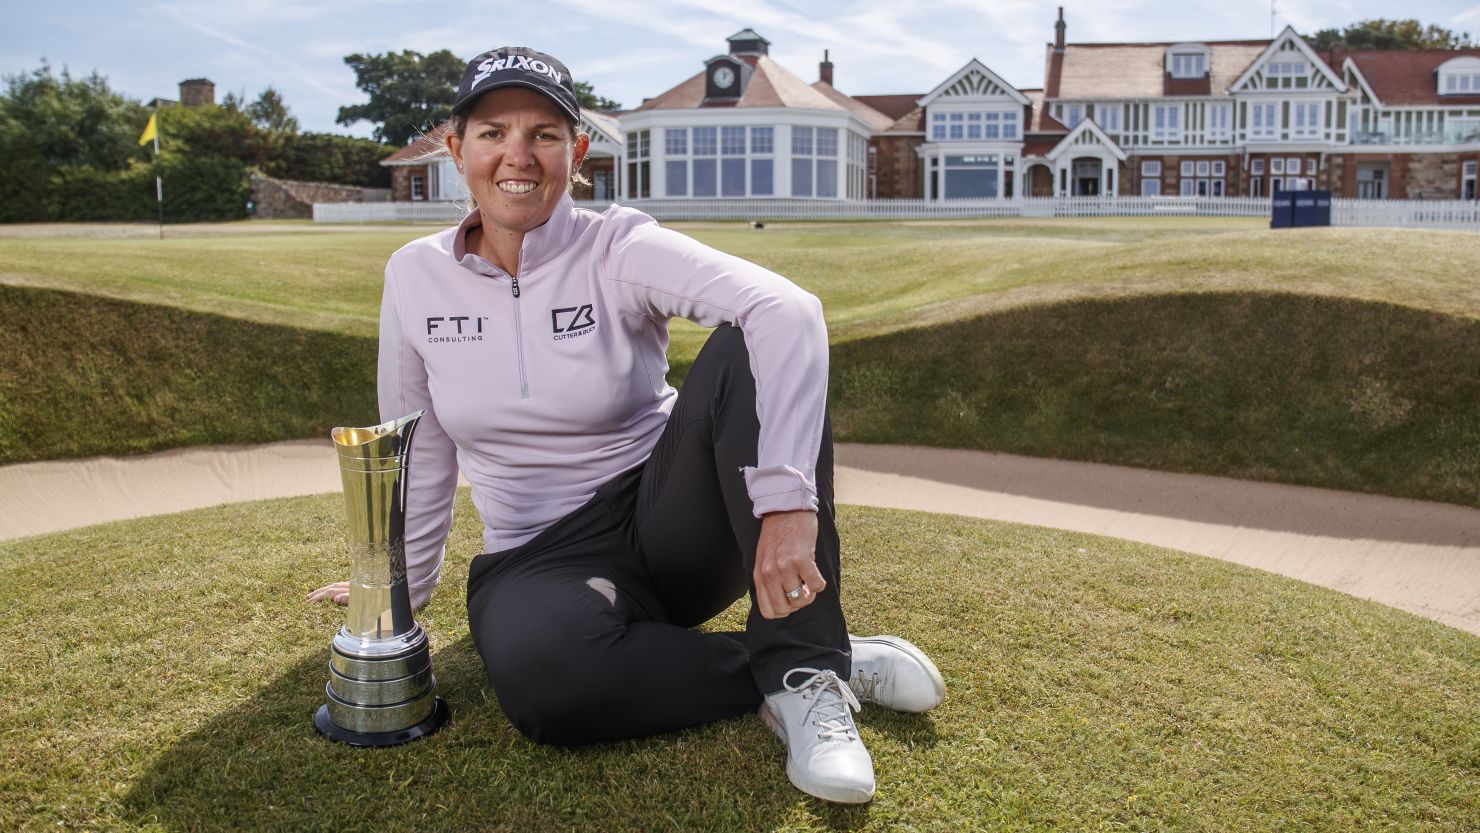 Ashleigh Buhai poses with the Women's Open trophy on the 18th green at Muirfield following her win.